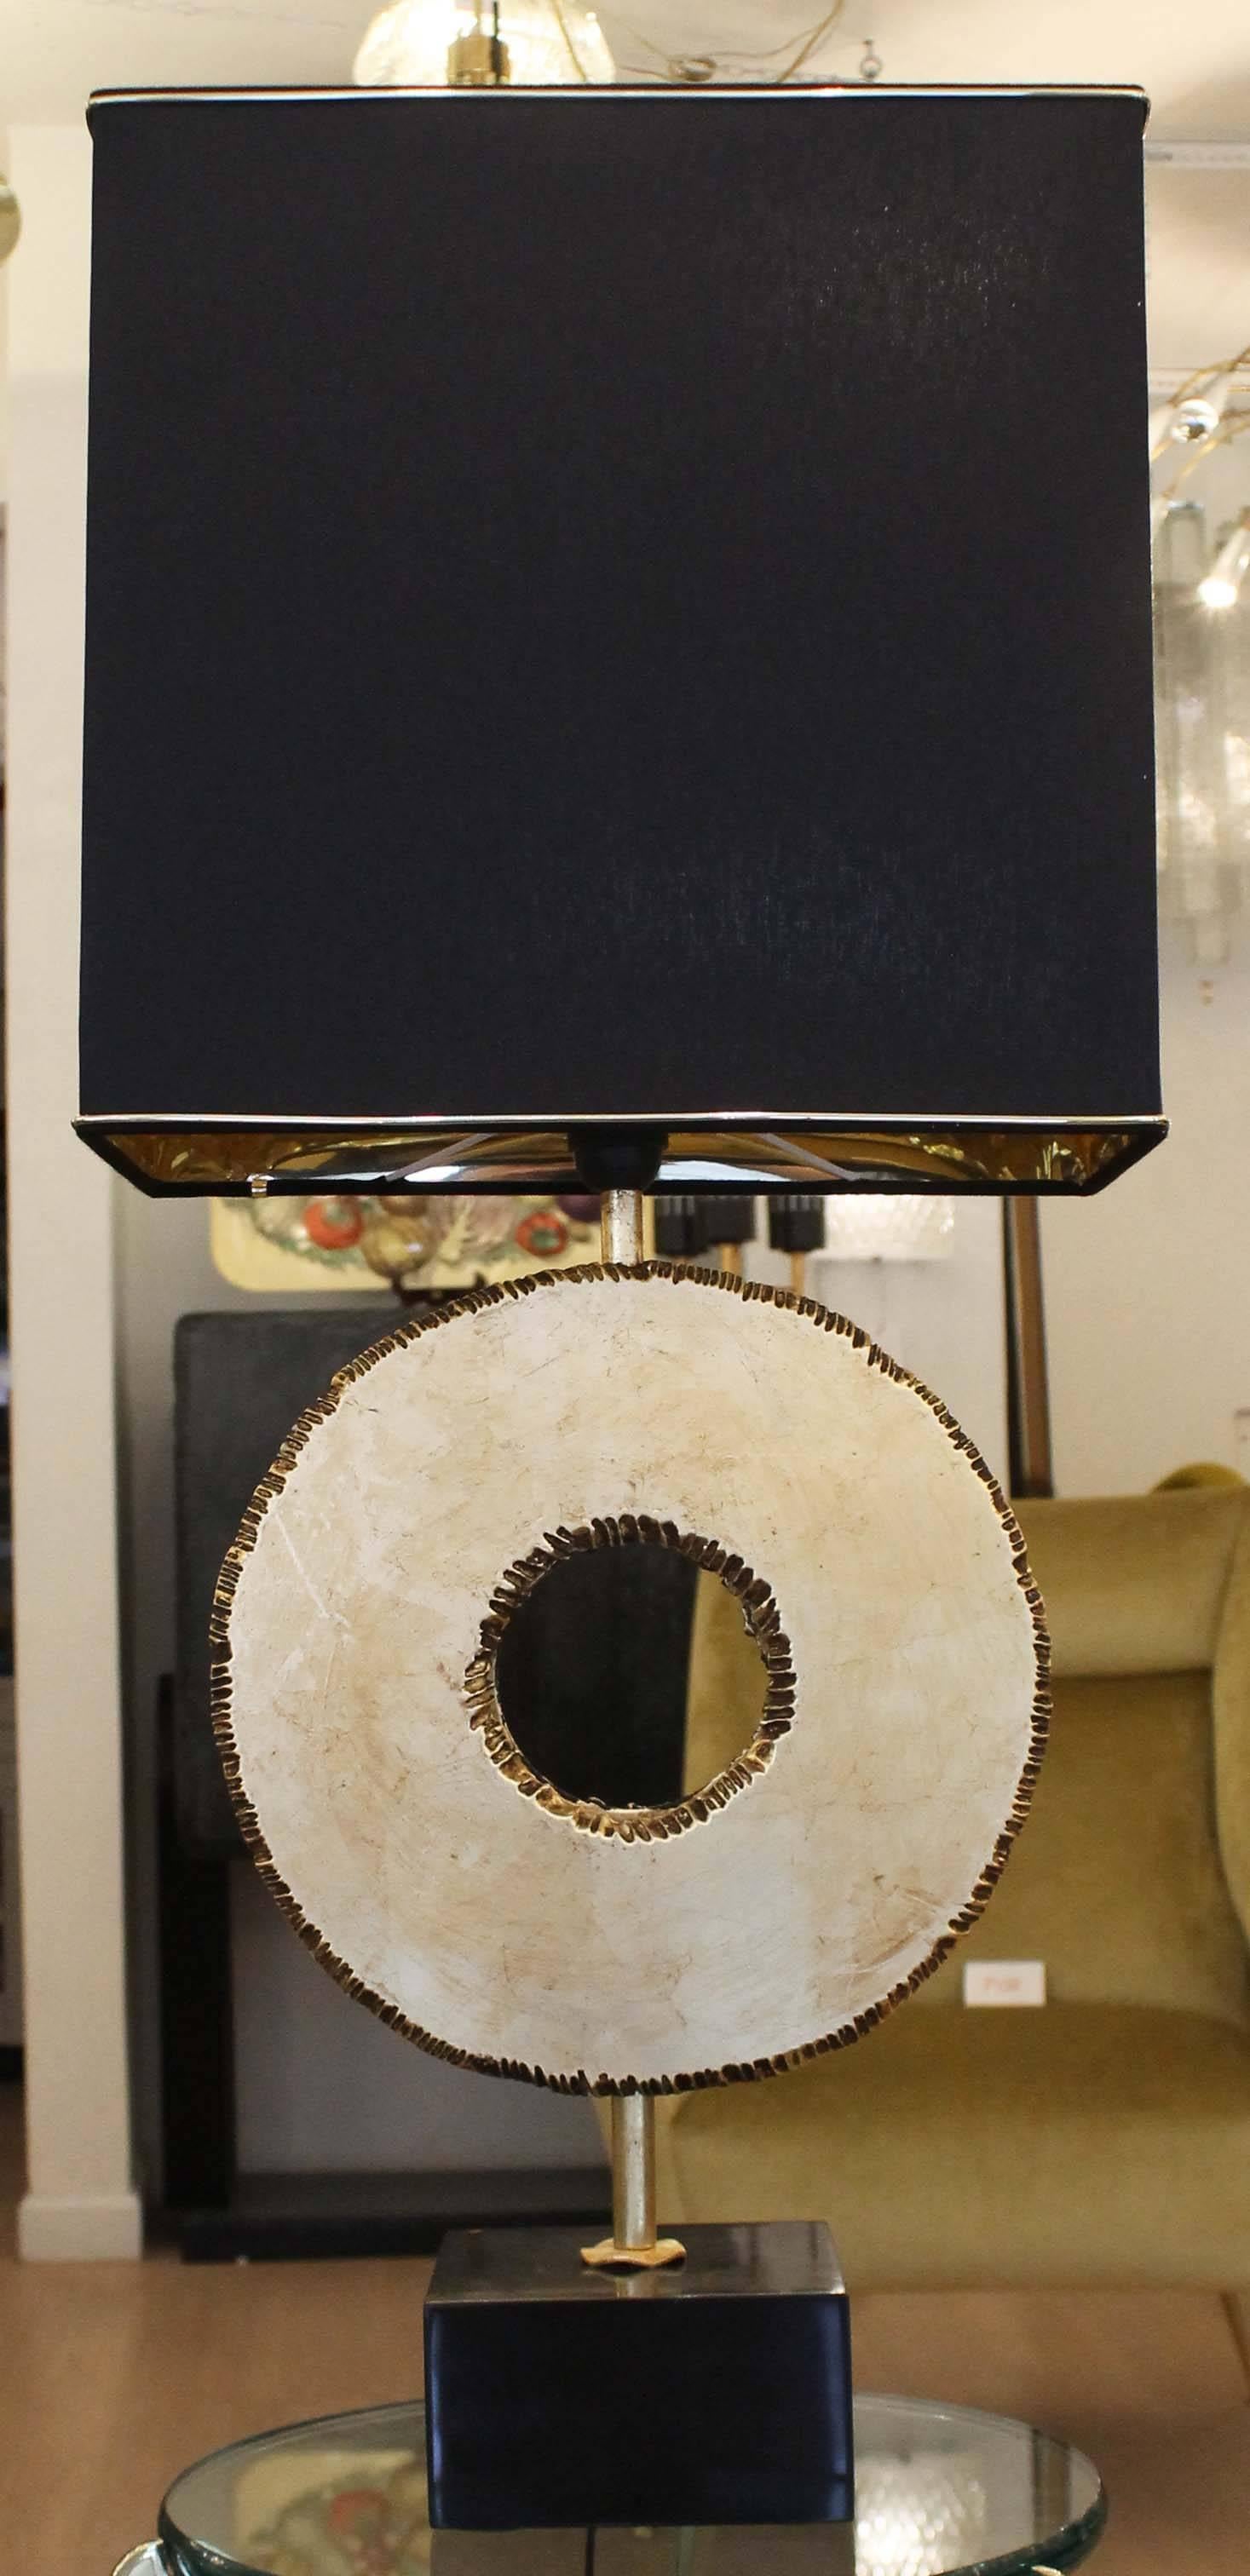 Sculptural pair of metal table lamps finished with gold leaf designed and manufactured by Banci in Florence, Italy. The bases are marble. Each holds one regular socket. The shade is not included in the price and height listed.